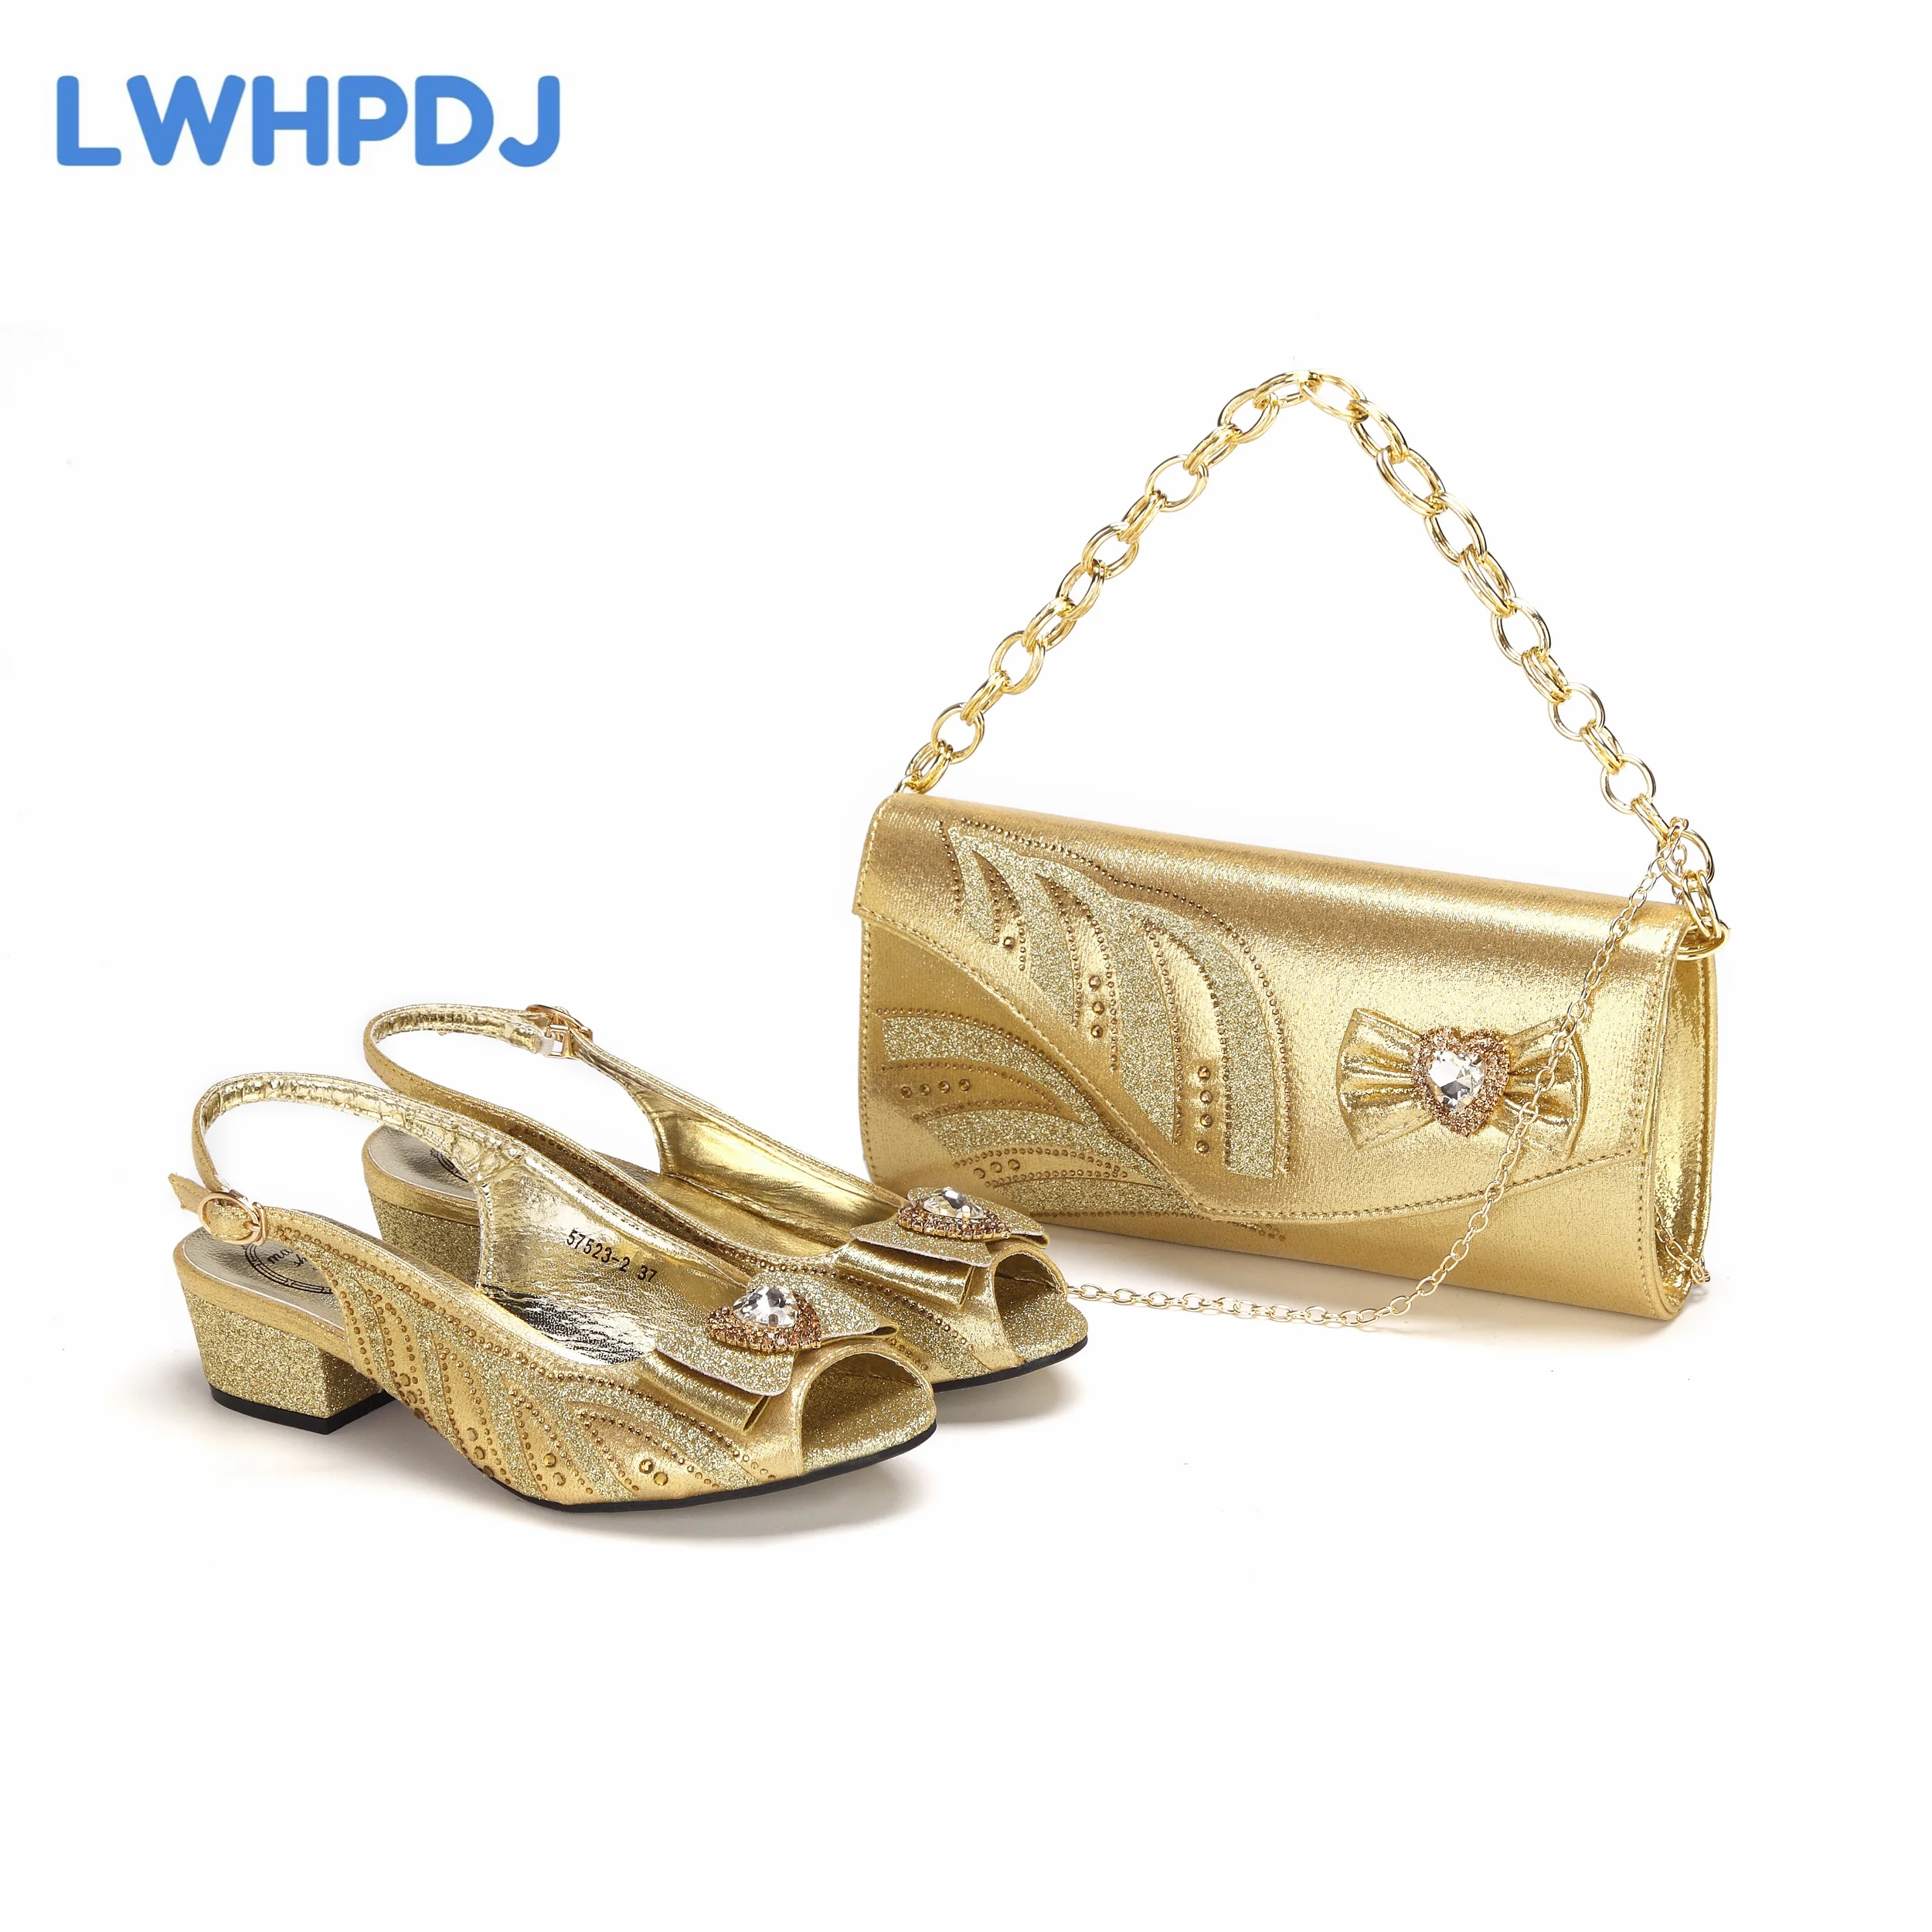 

Hot Selling Streamline Design Peep Toe Low Heels Ladies Sandal Shoes and Bag Set in Gold Color For Women Party